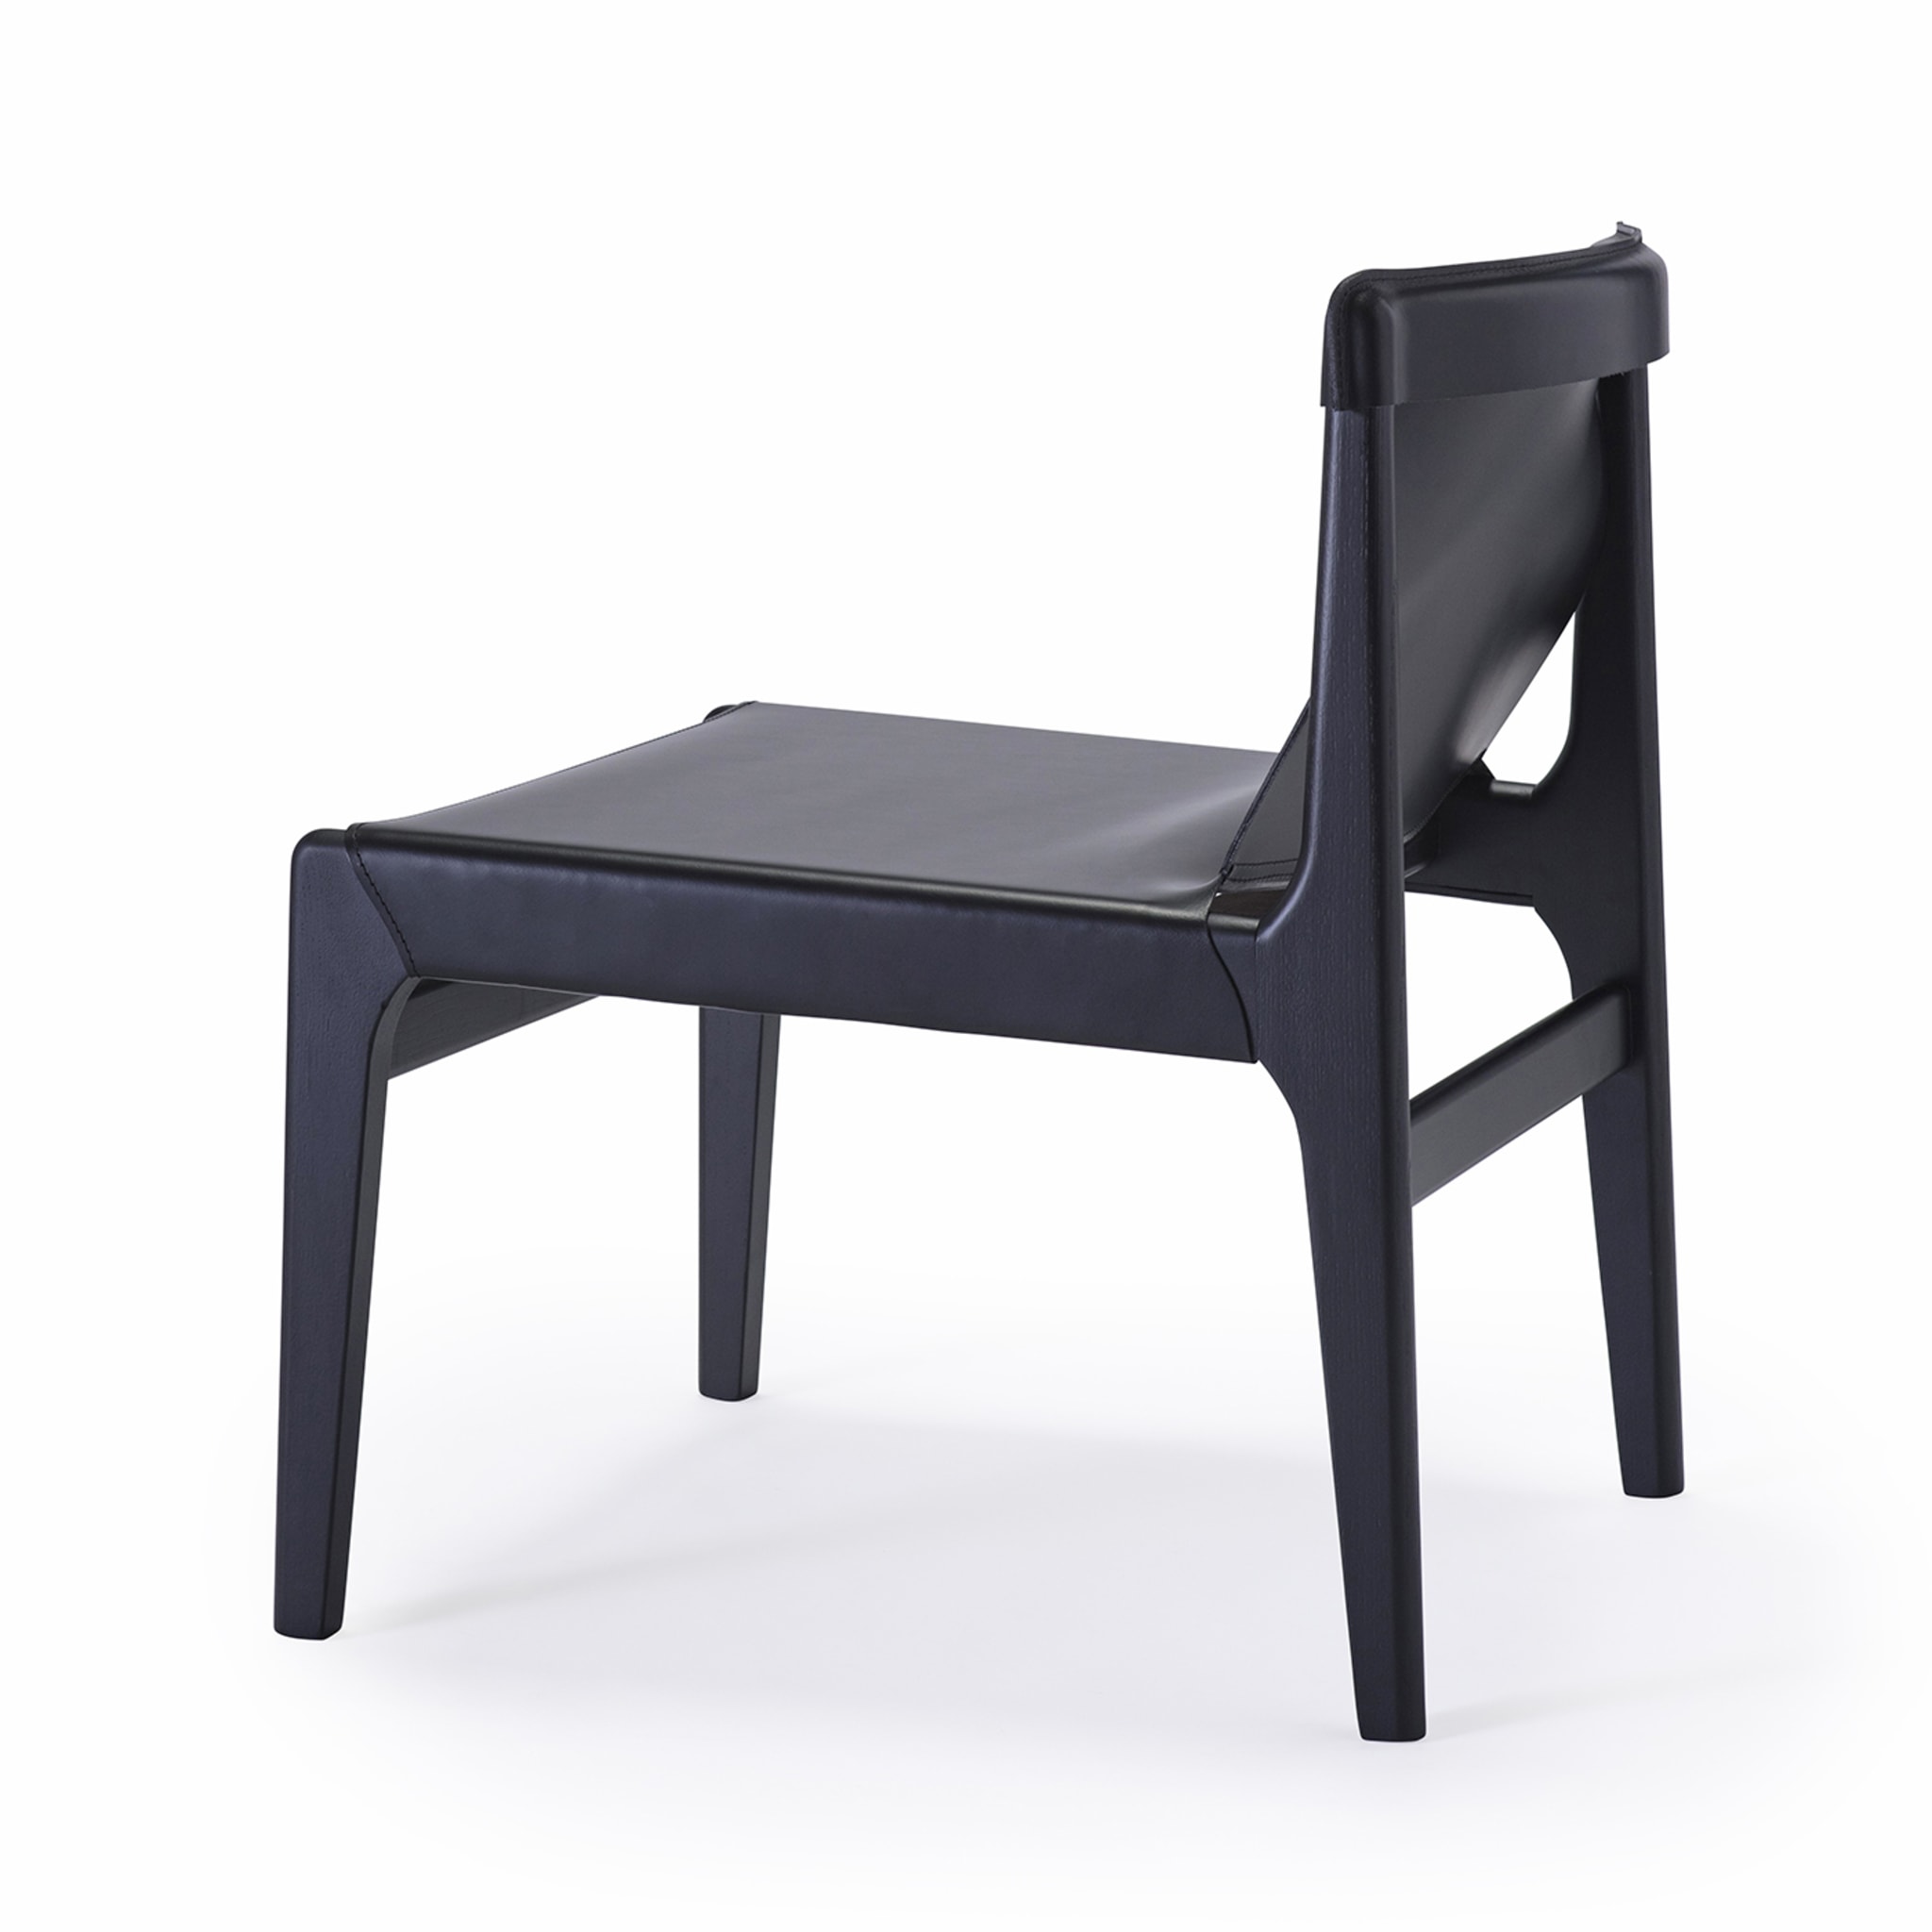 Burano Black Leather Lounge Chair by Balutto Associati - Alternative view 2